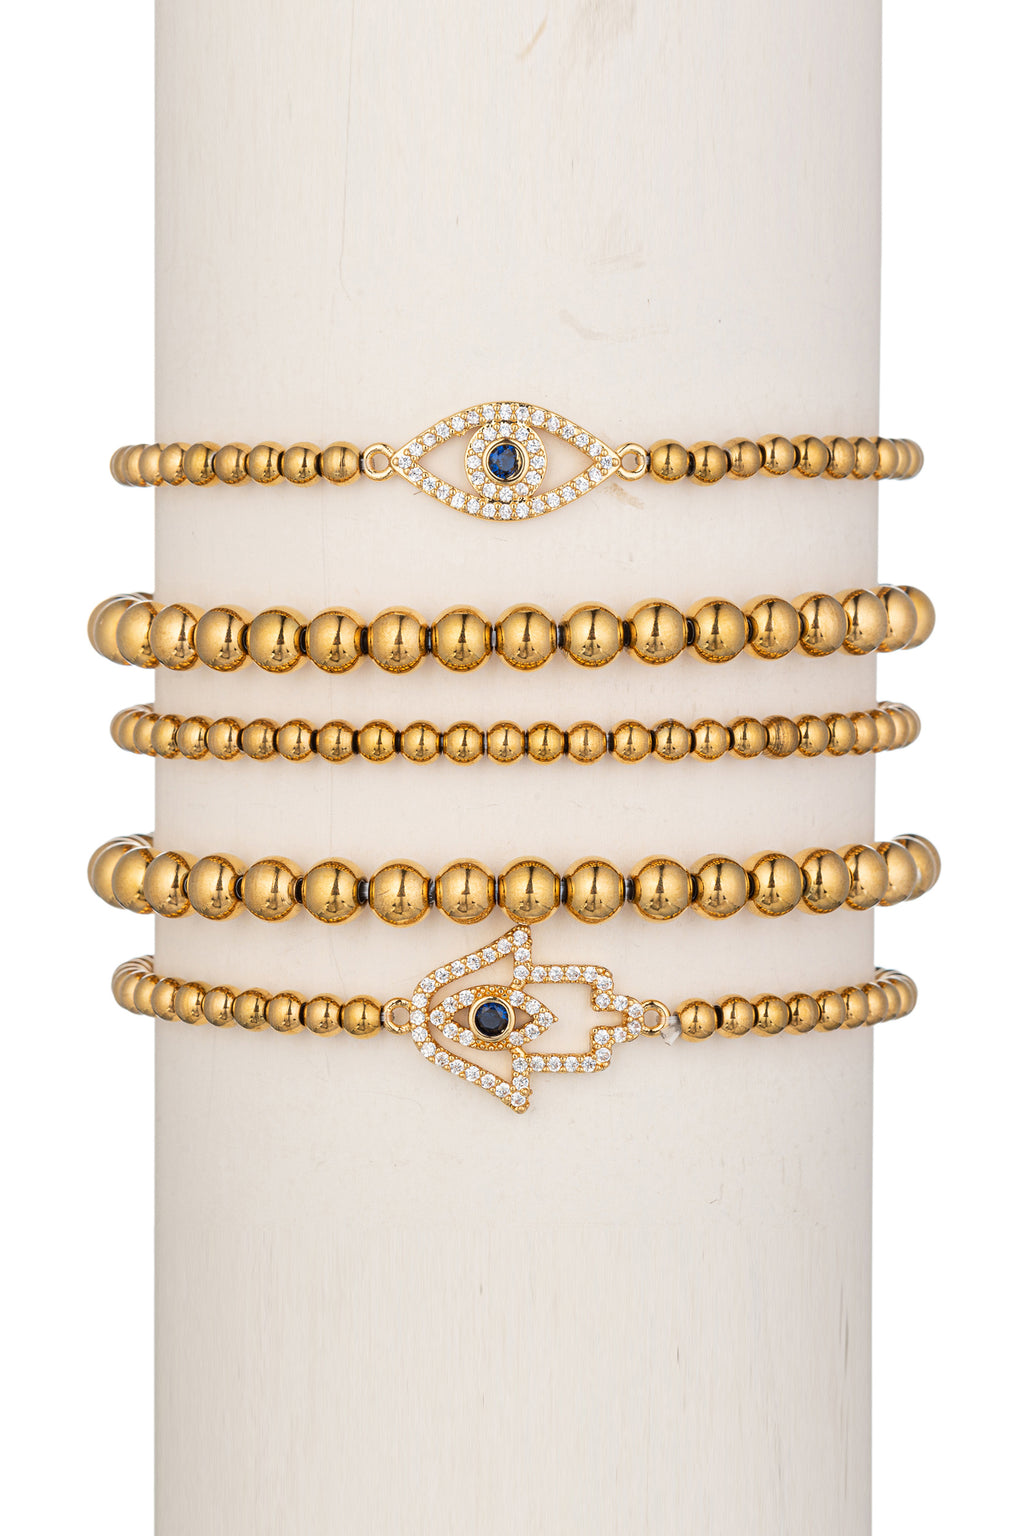 5-piece bracelet set with an eye and hamsa hand pendant studded with CZ crystals.